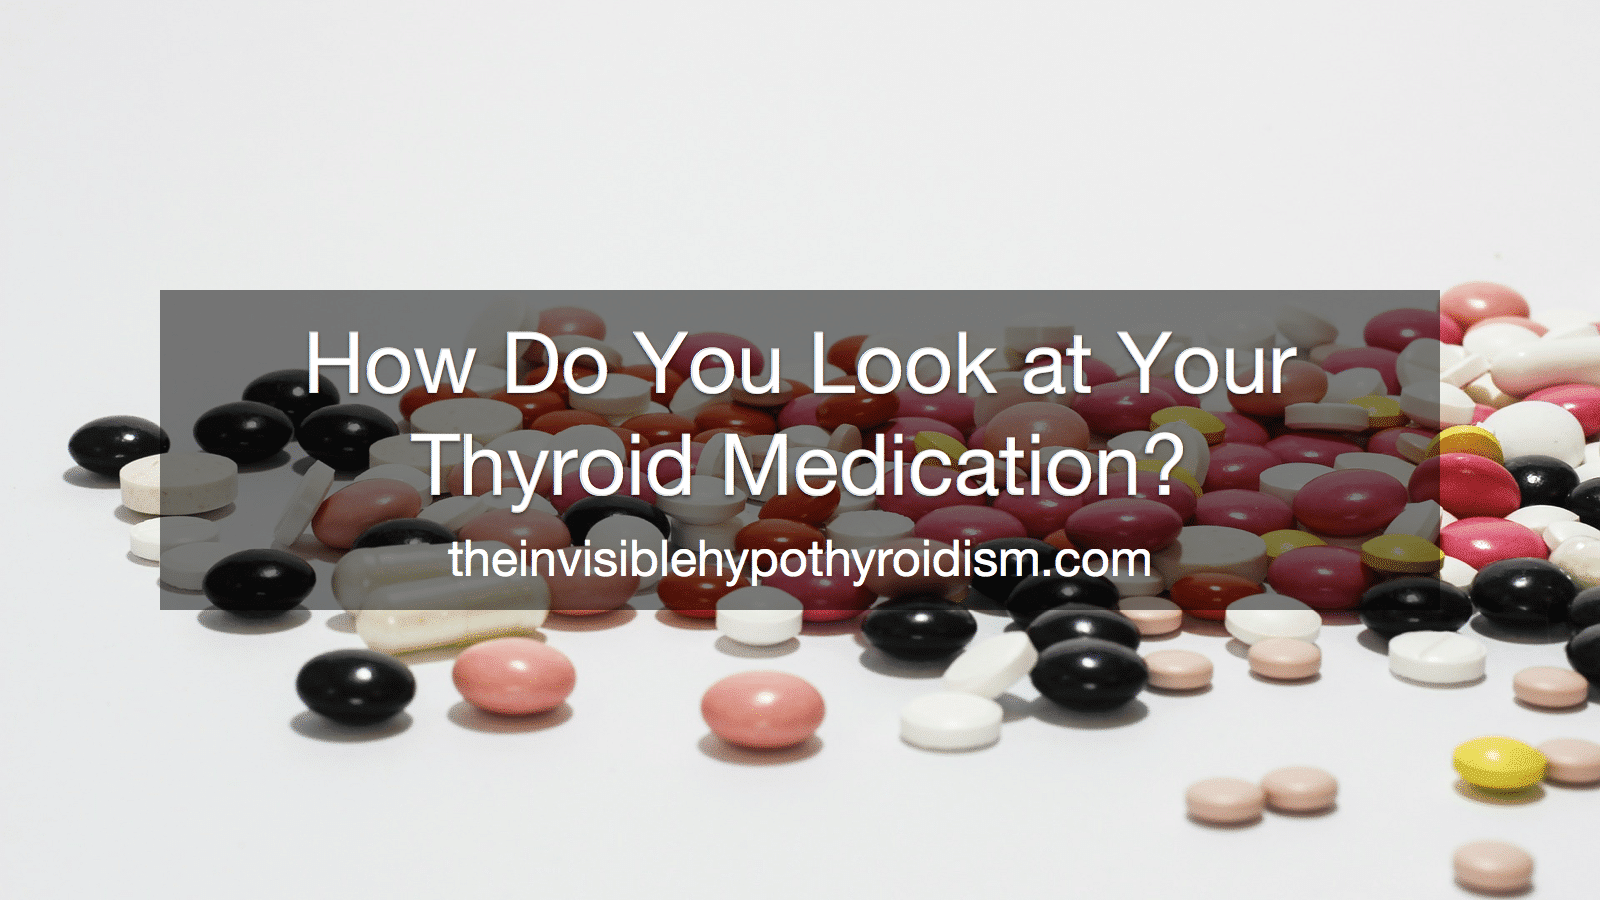 How Do You Look at Your Thyroid Medication?